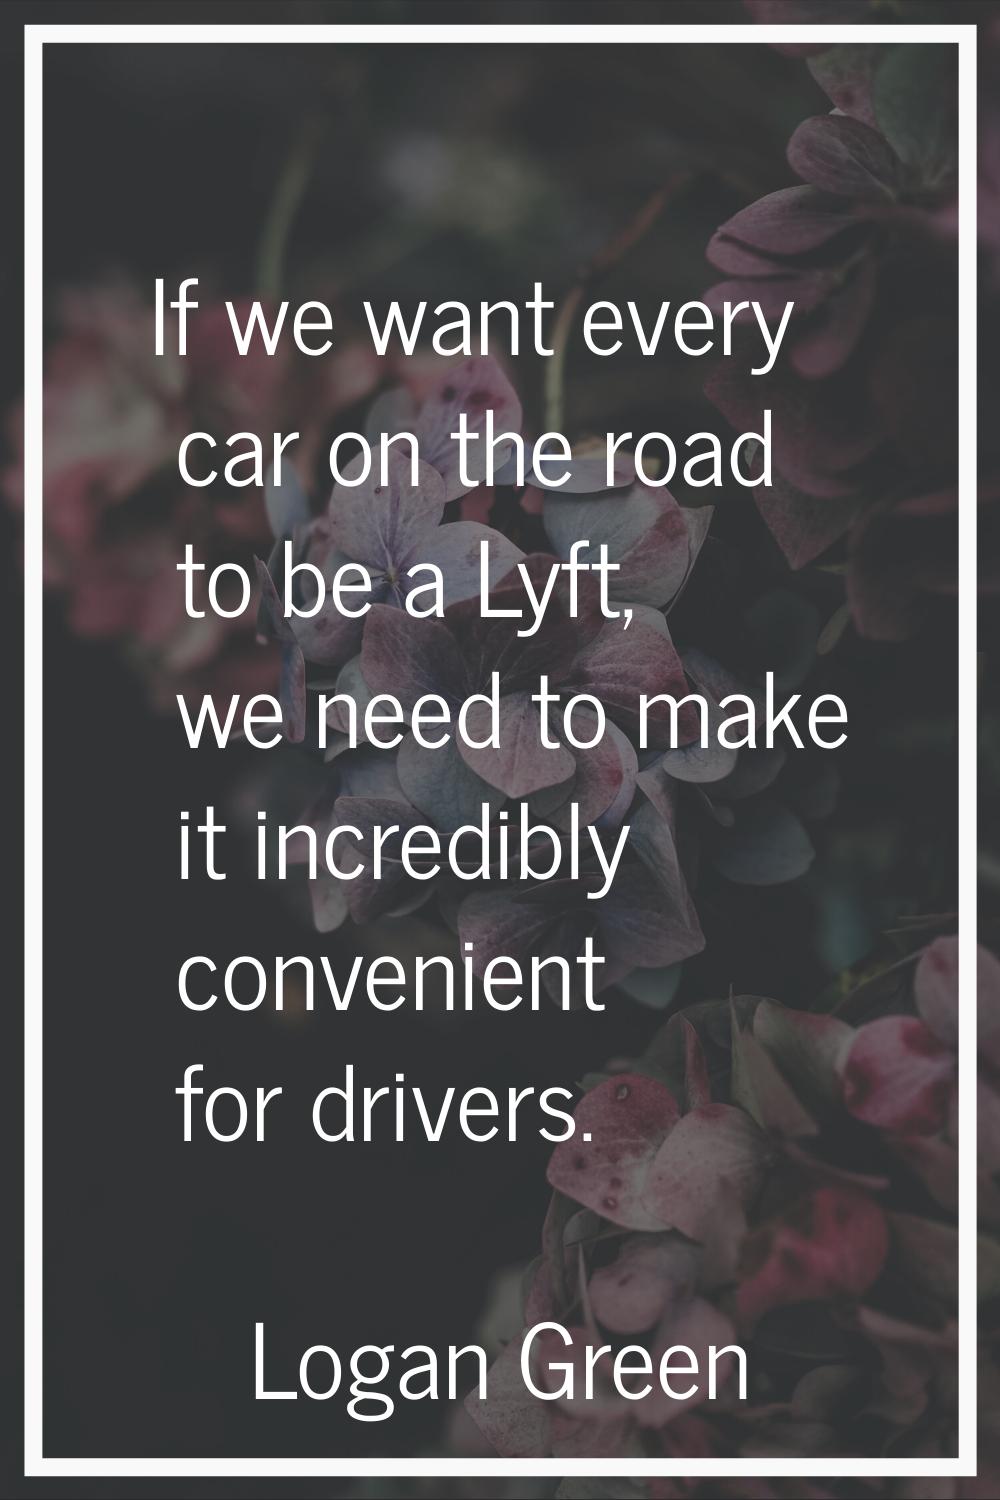 If we want every car on the road to be a Lyft, we need to make it incredibly convenient for drivers